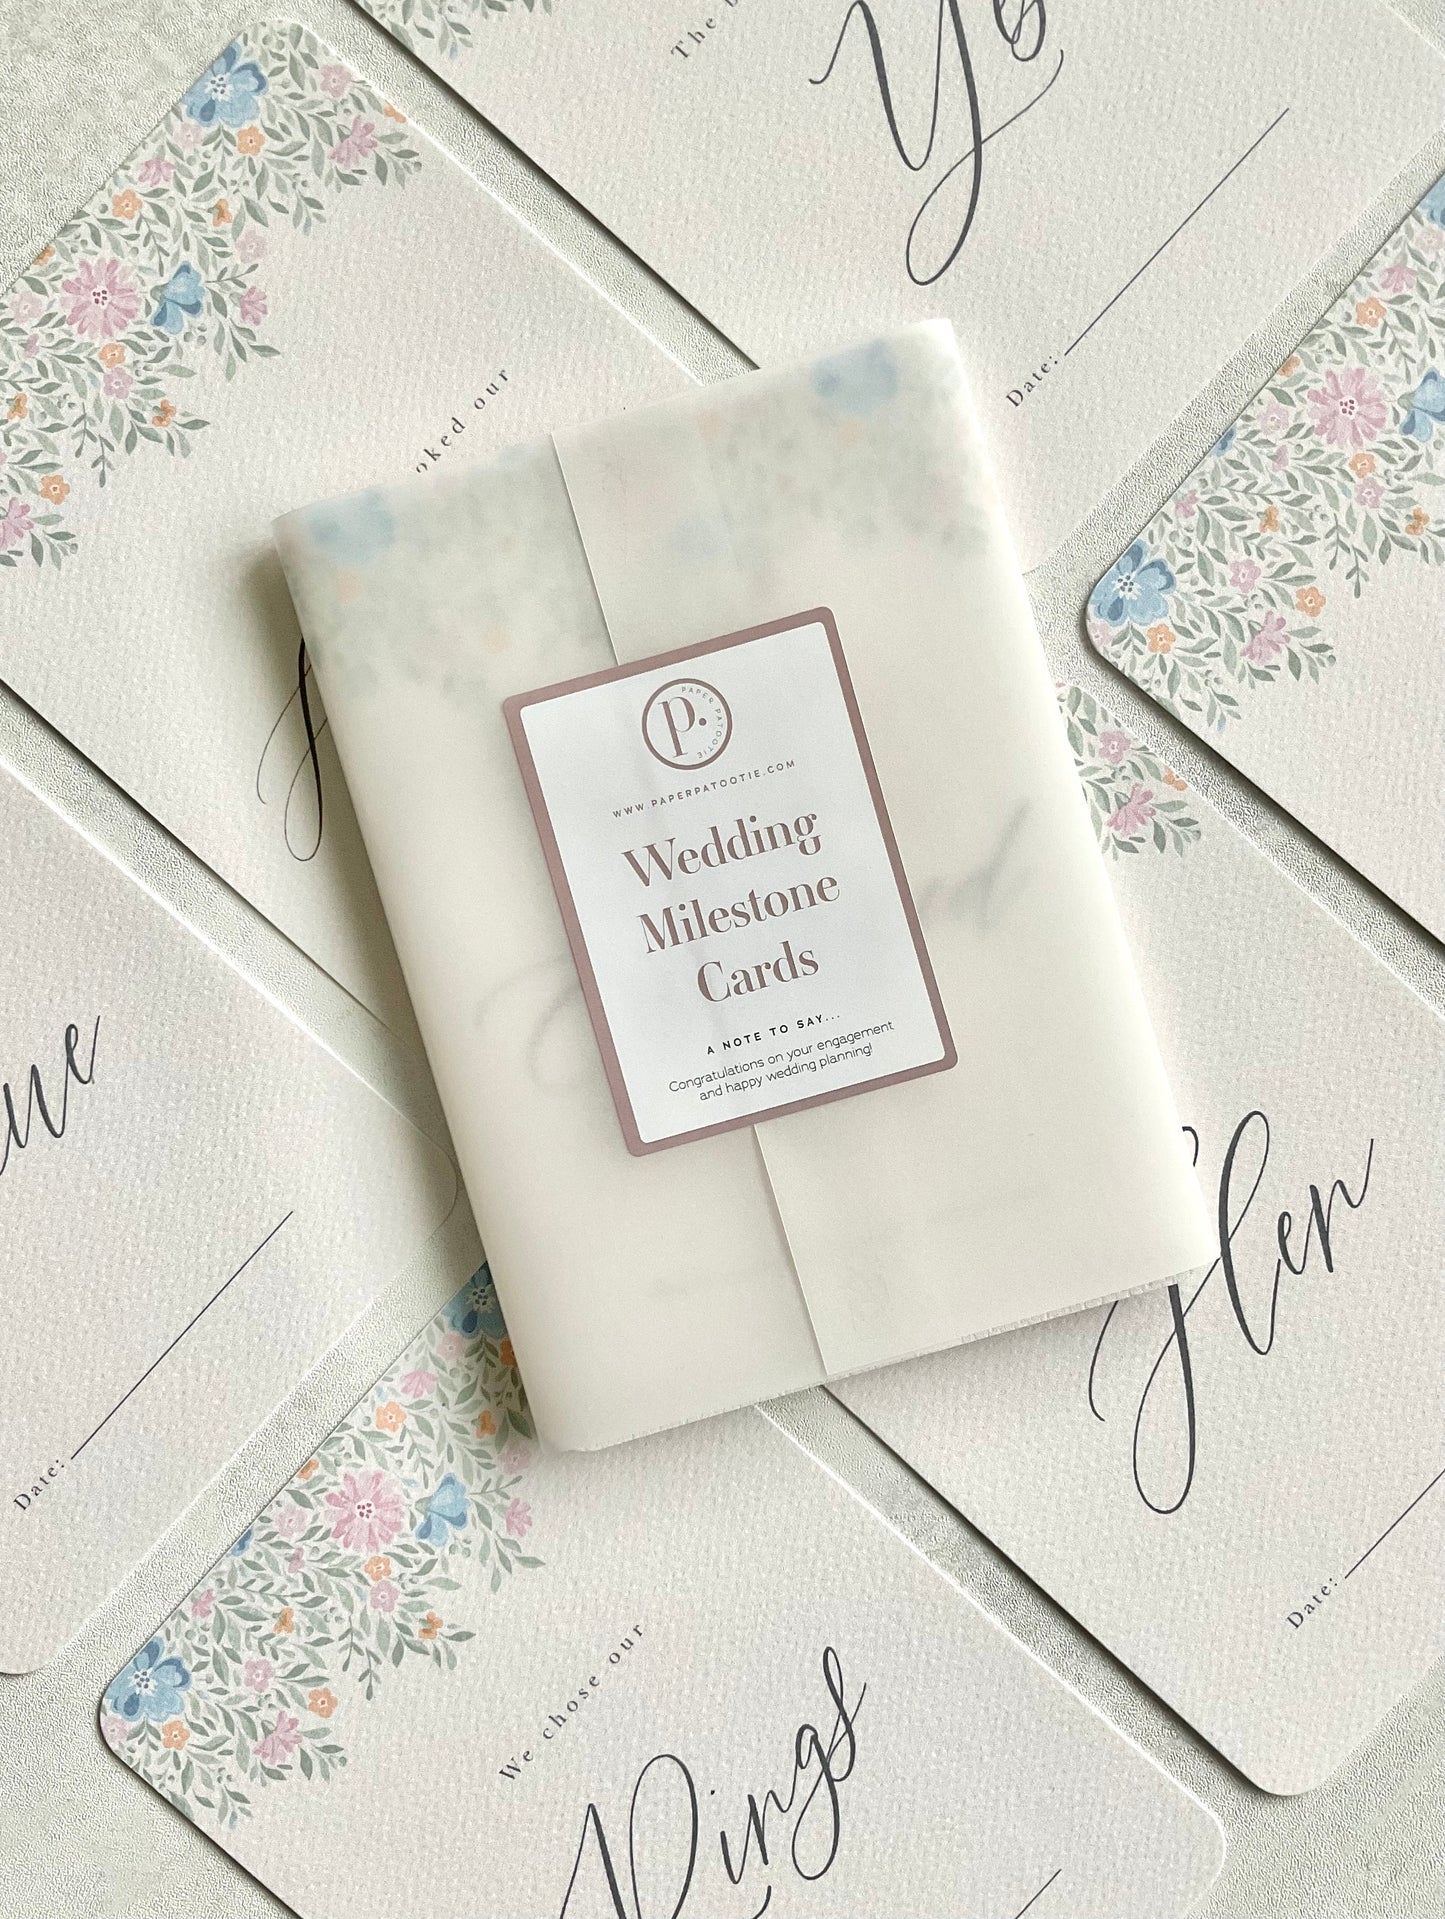 Wedding Milestone Countdown Cards in Floral - Customisable with Names & Wedding Date